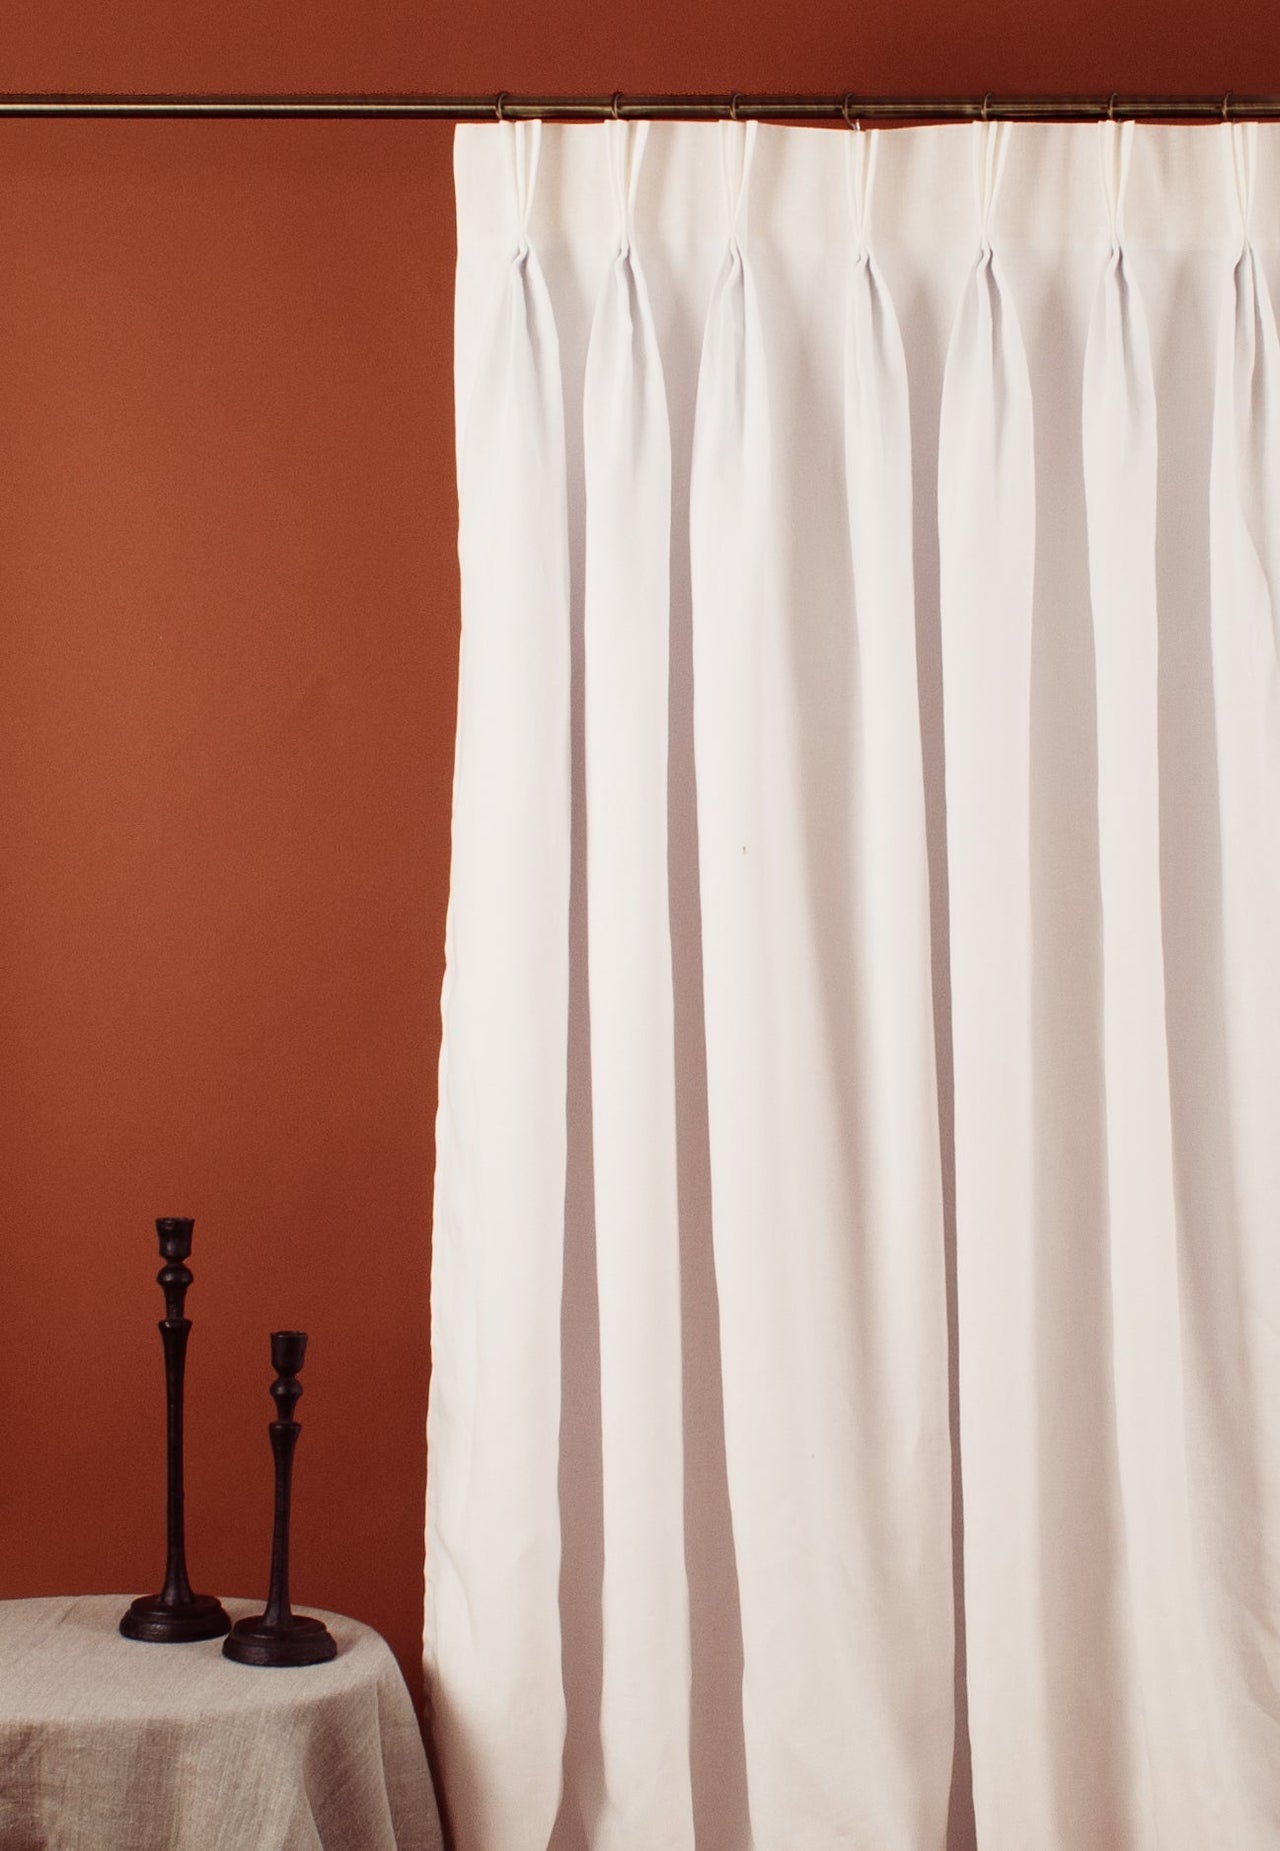 Triple Pinch Pleat Linen Curtain Panel with Blackout Lining - Tailored and Classic Look Drape